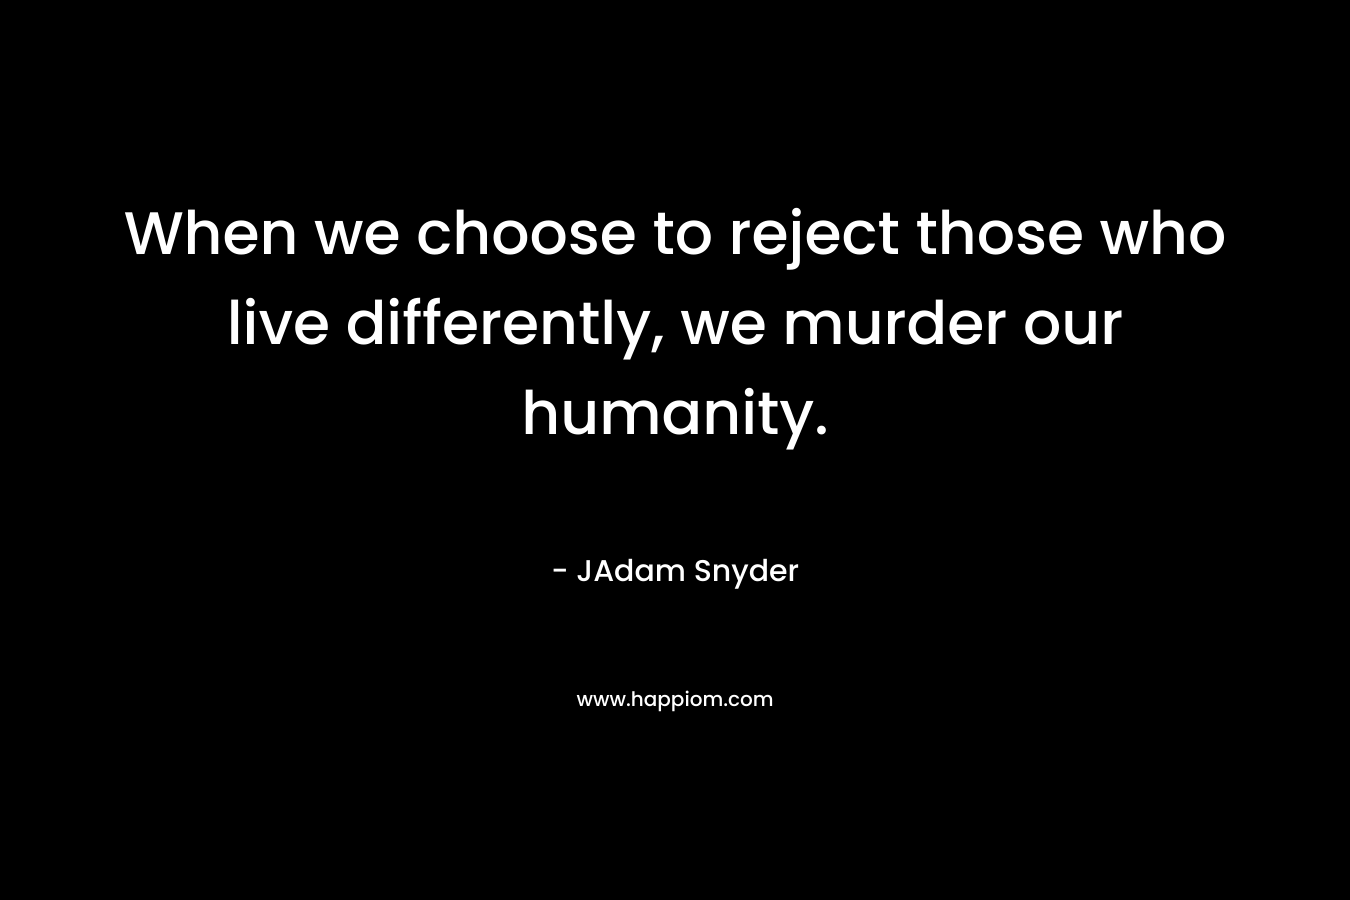 When we choose to reject those who live differently, we murder our humanity.